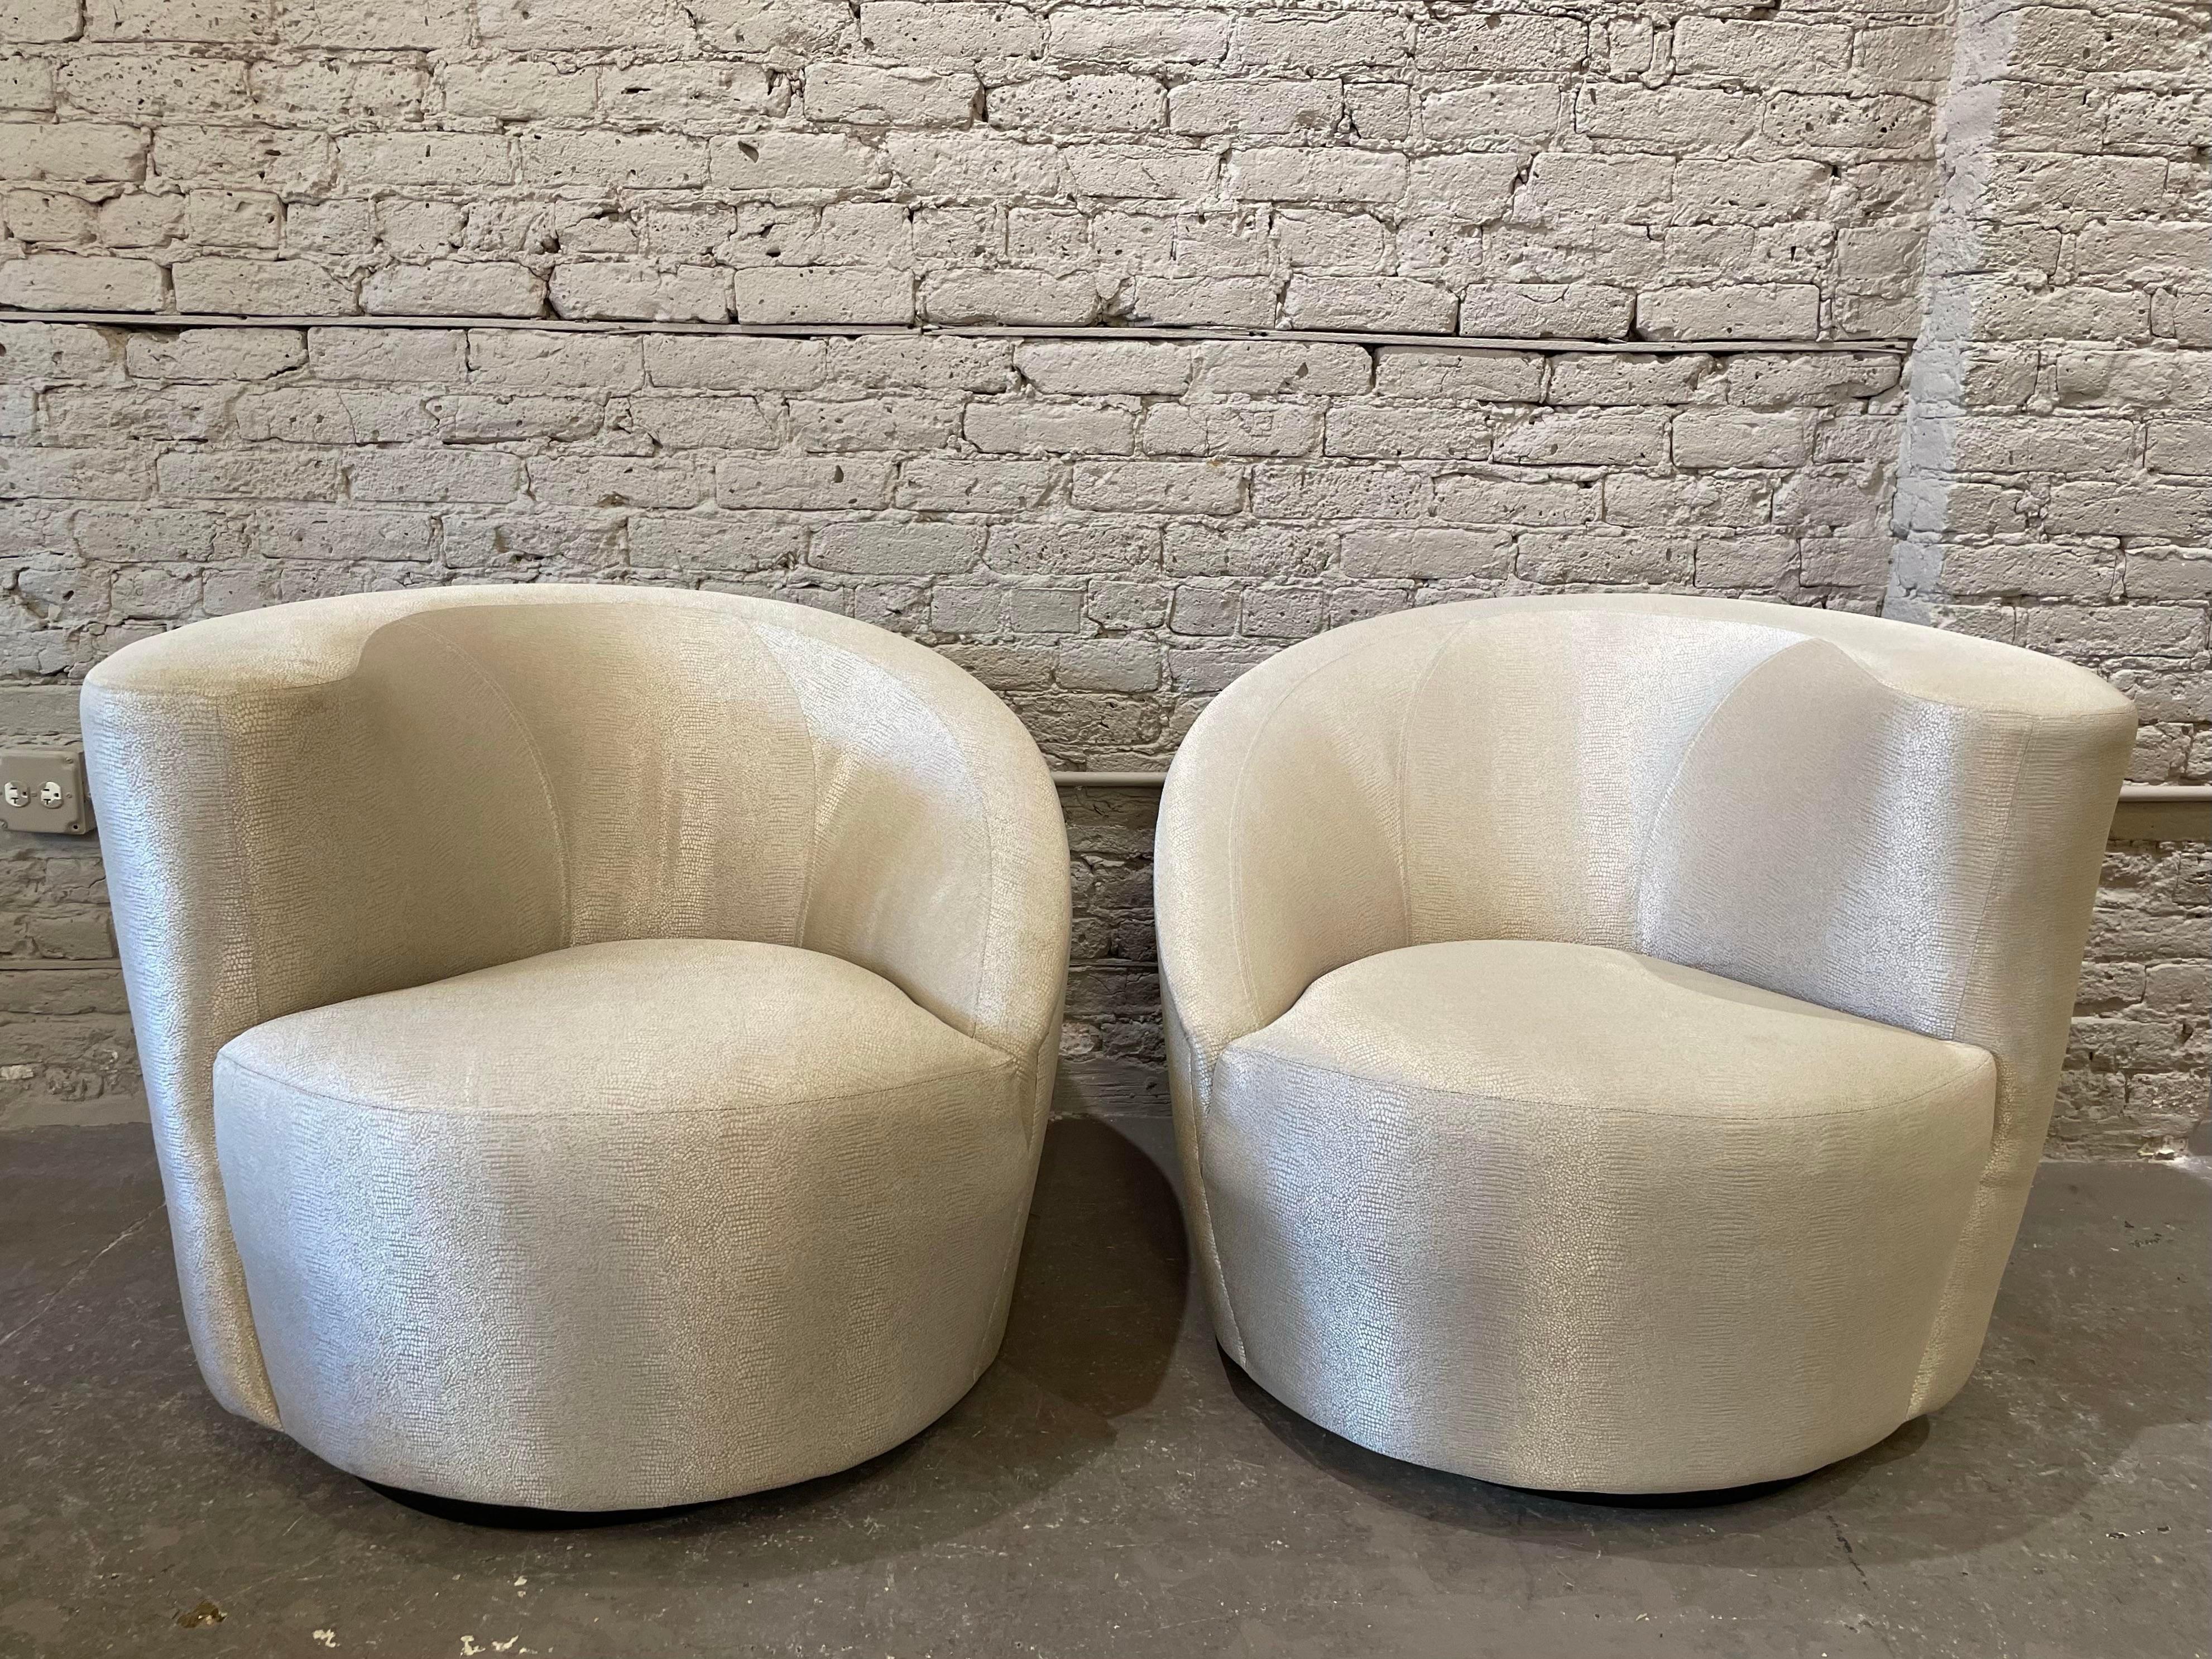 1970s Kagan Directional Nautilus Swivel Chairs Vintage - a Pair For Sale 3